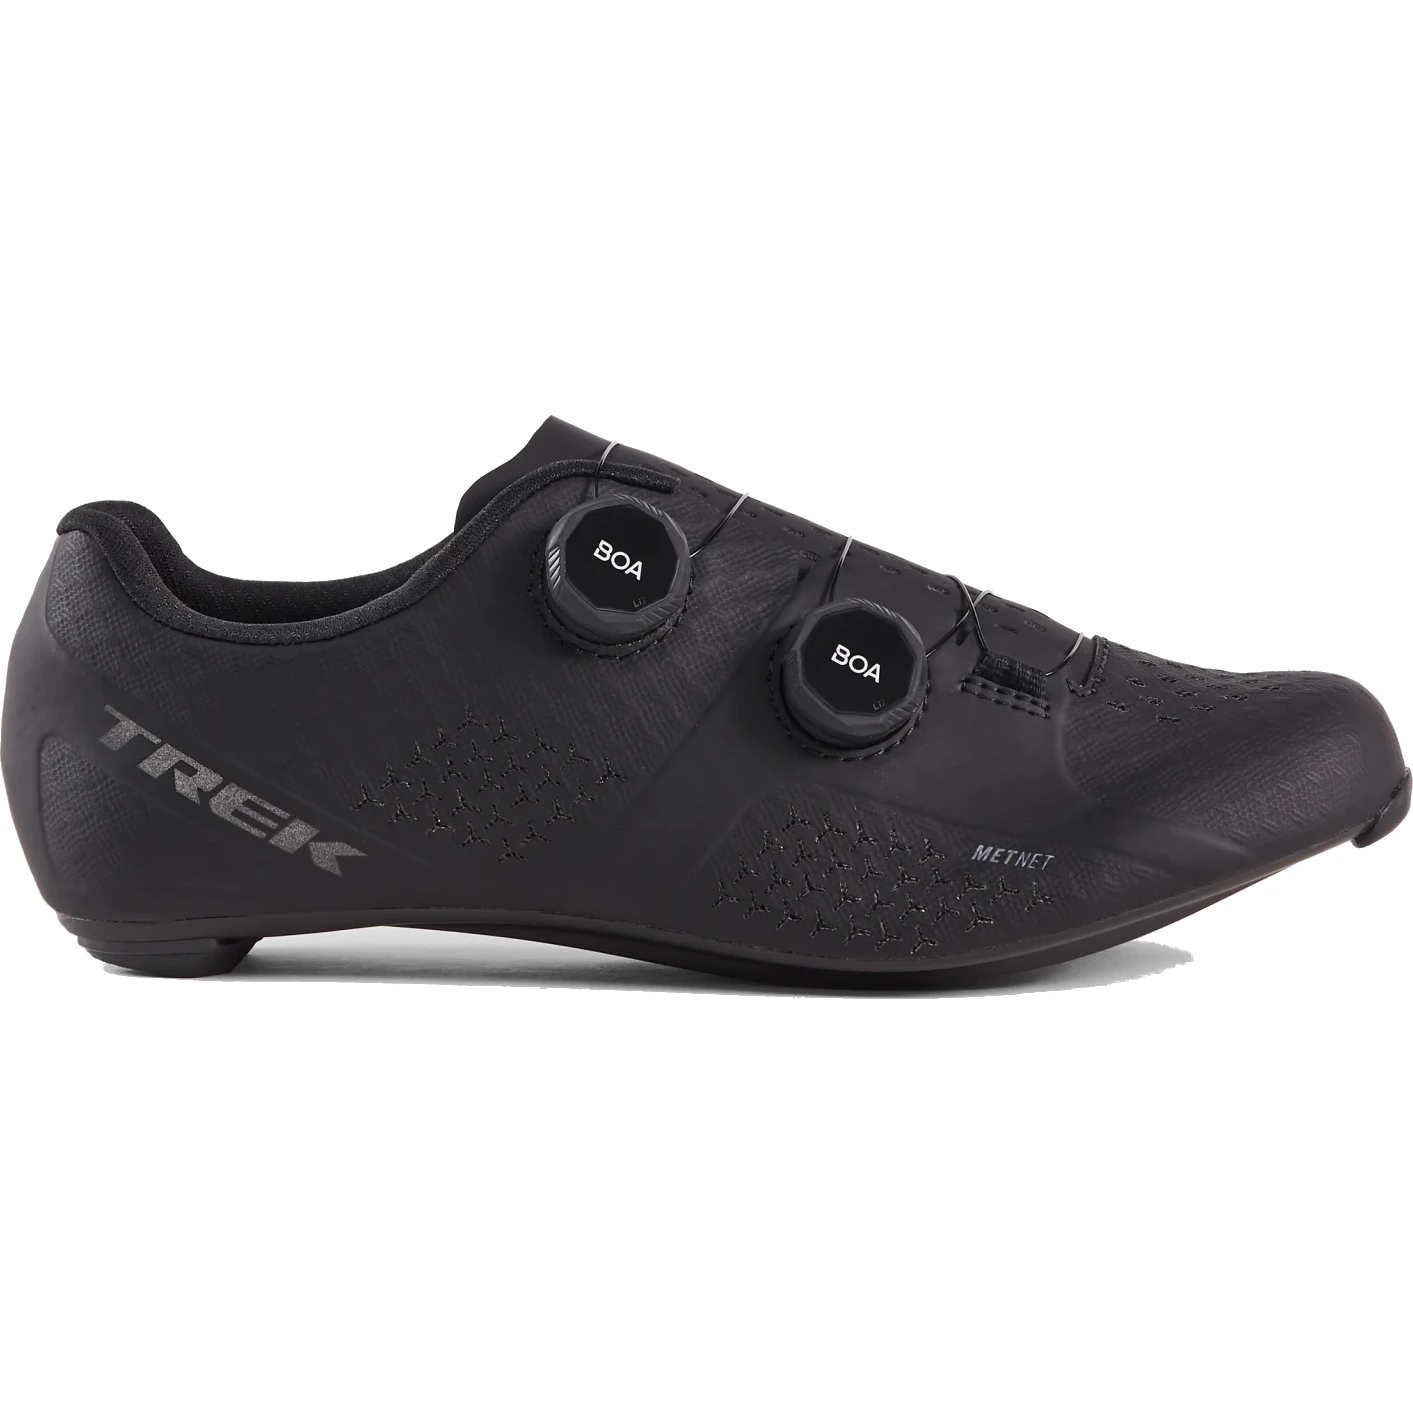 Picture of Trek Velocis Road Cycling Shoes - Black